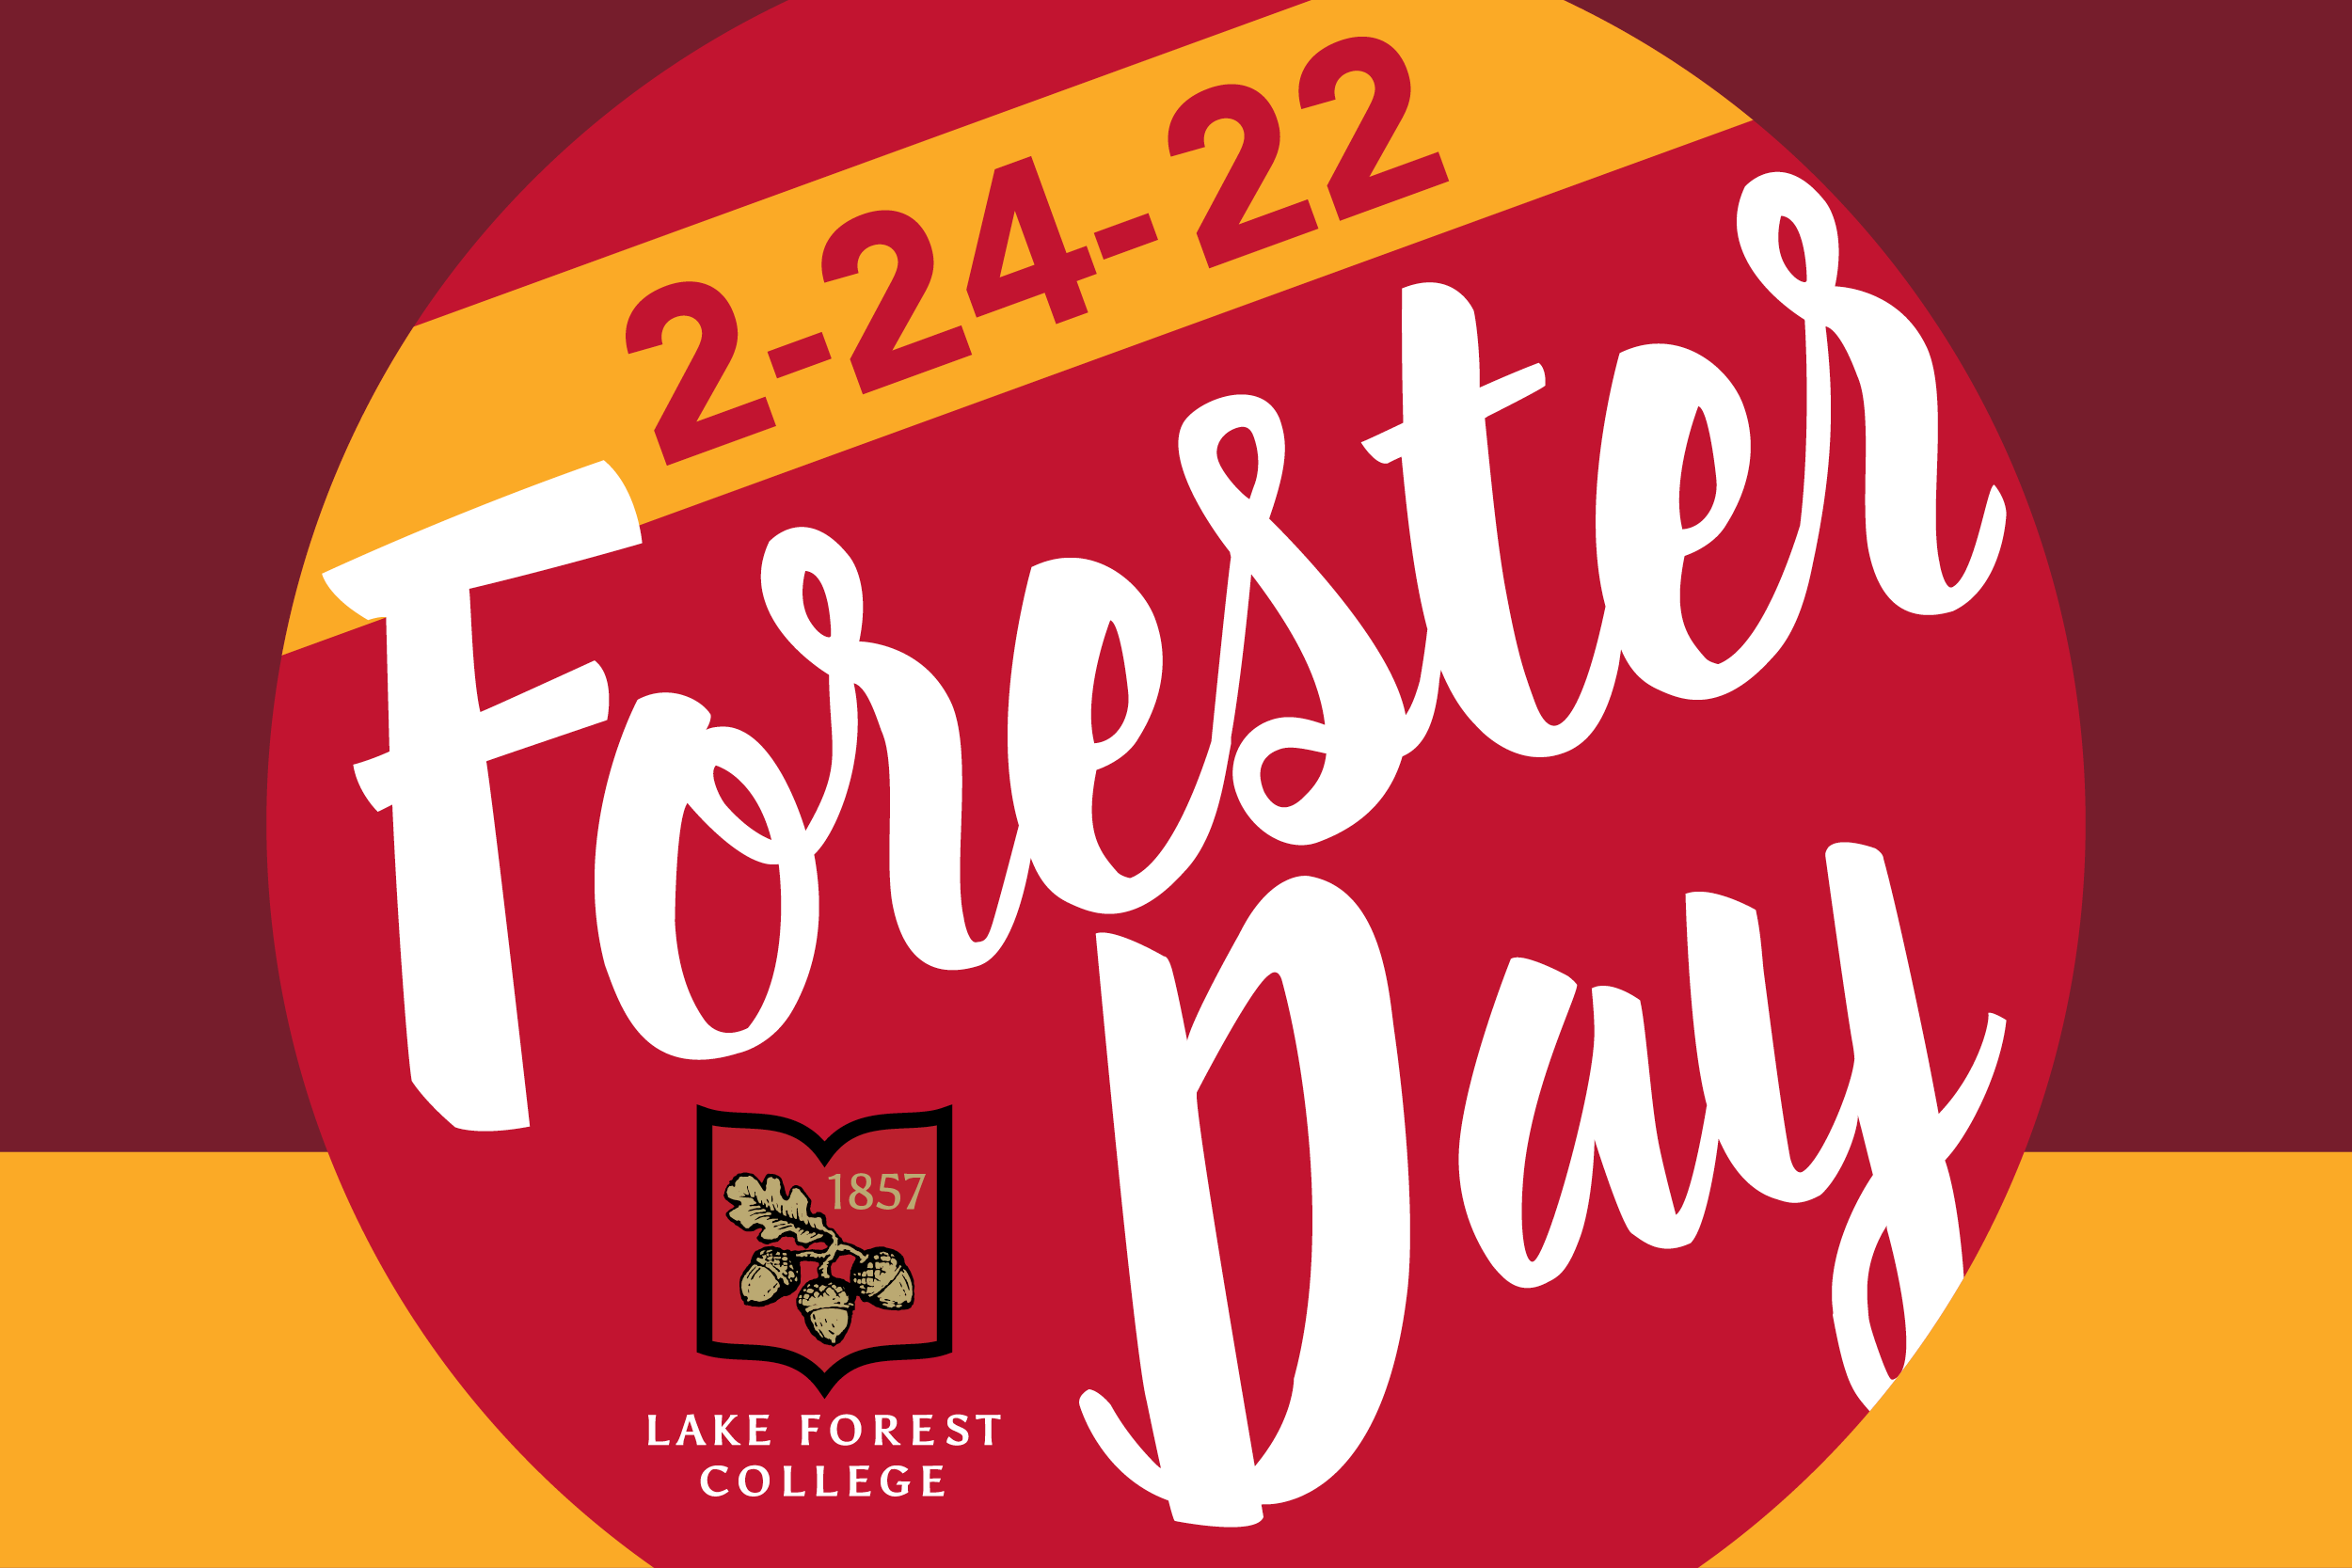 Forester Day 2022